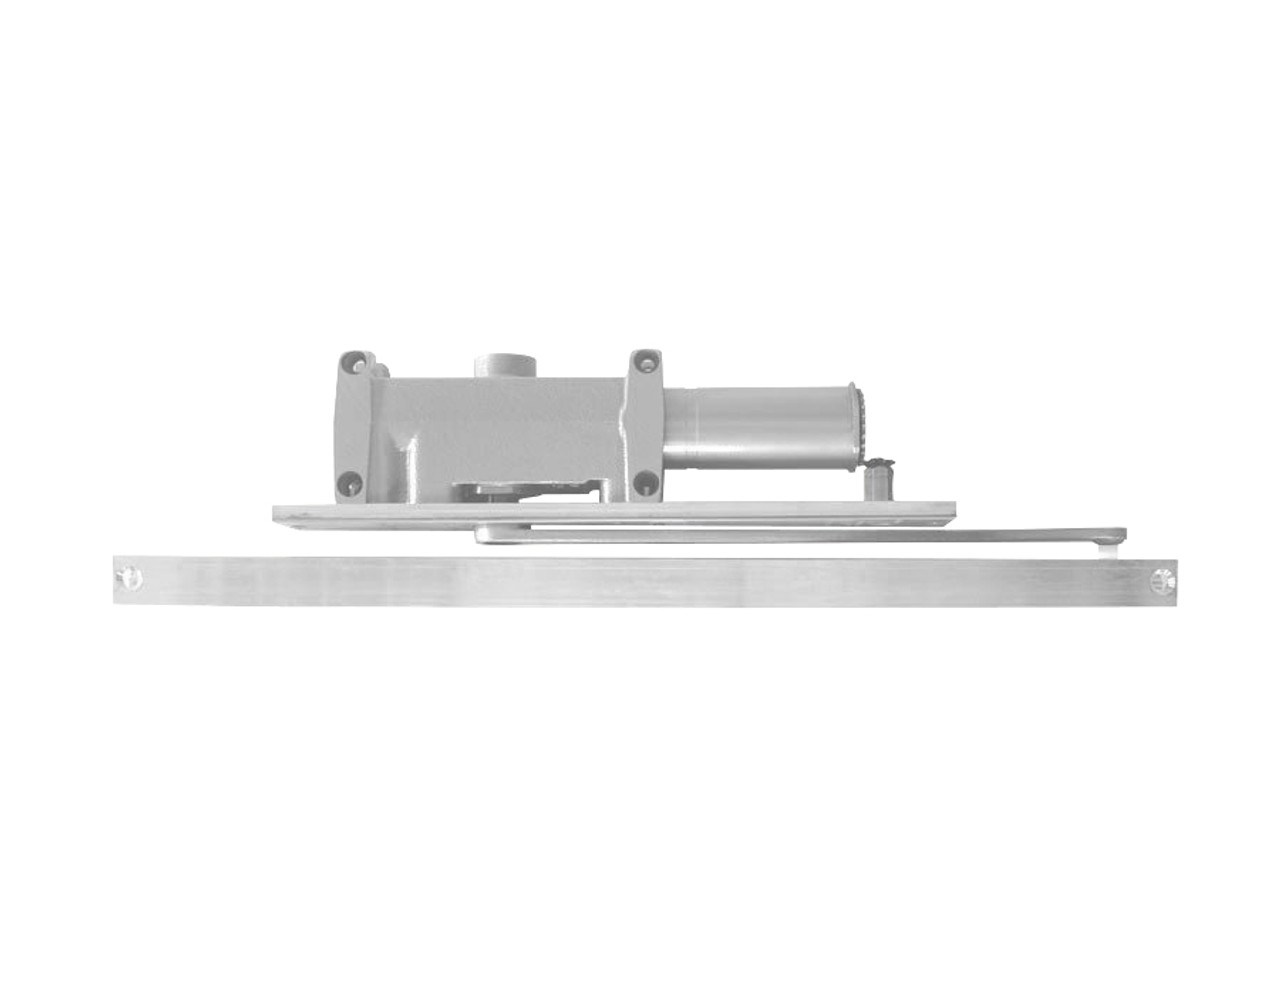 2011-H-LH-LH-US26D LCN Door Closer with Hold Open Arm in Satin Chrome Finish